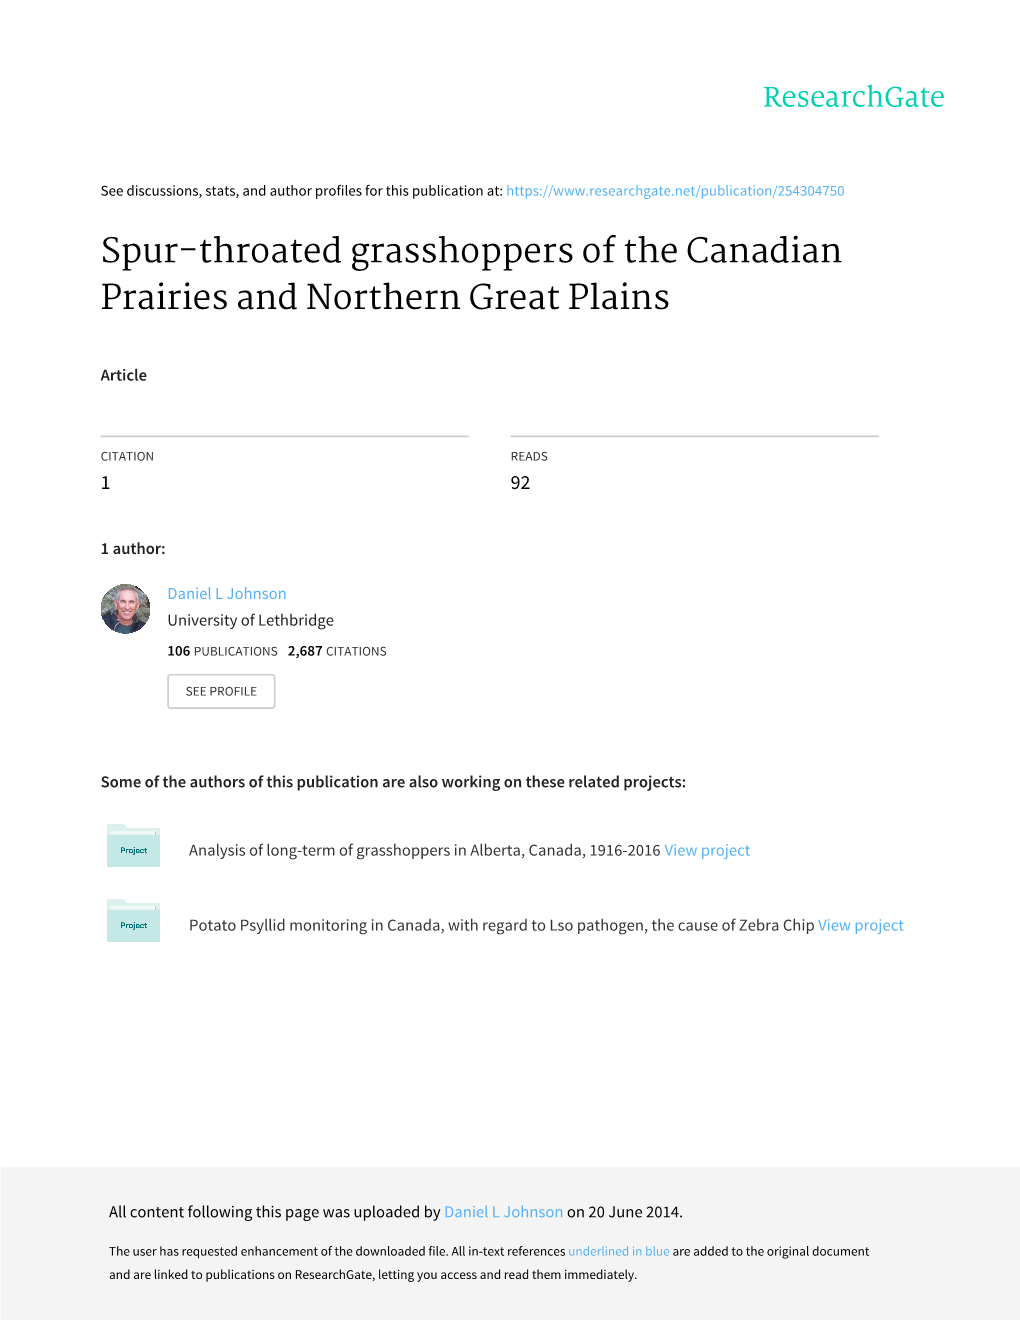 Spur-Throated Grasshoppers of the Canadian Prairies and Northern Great Plains